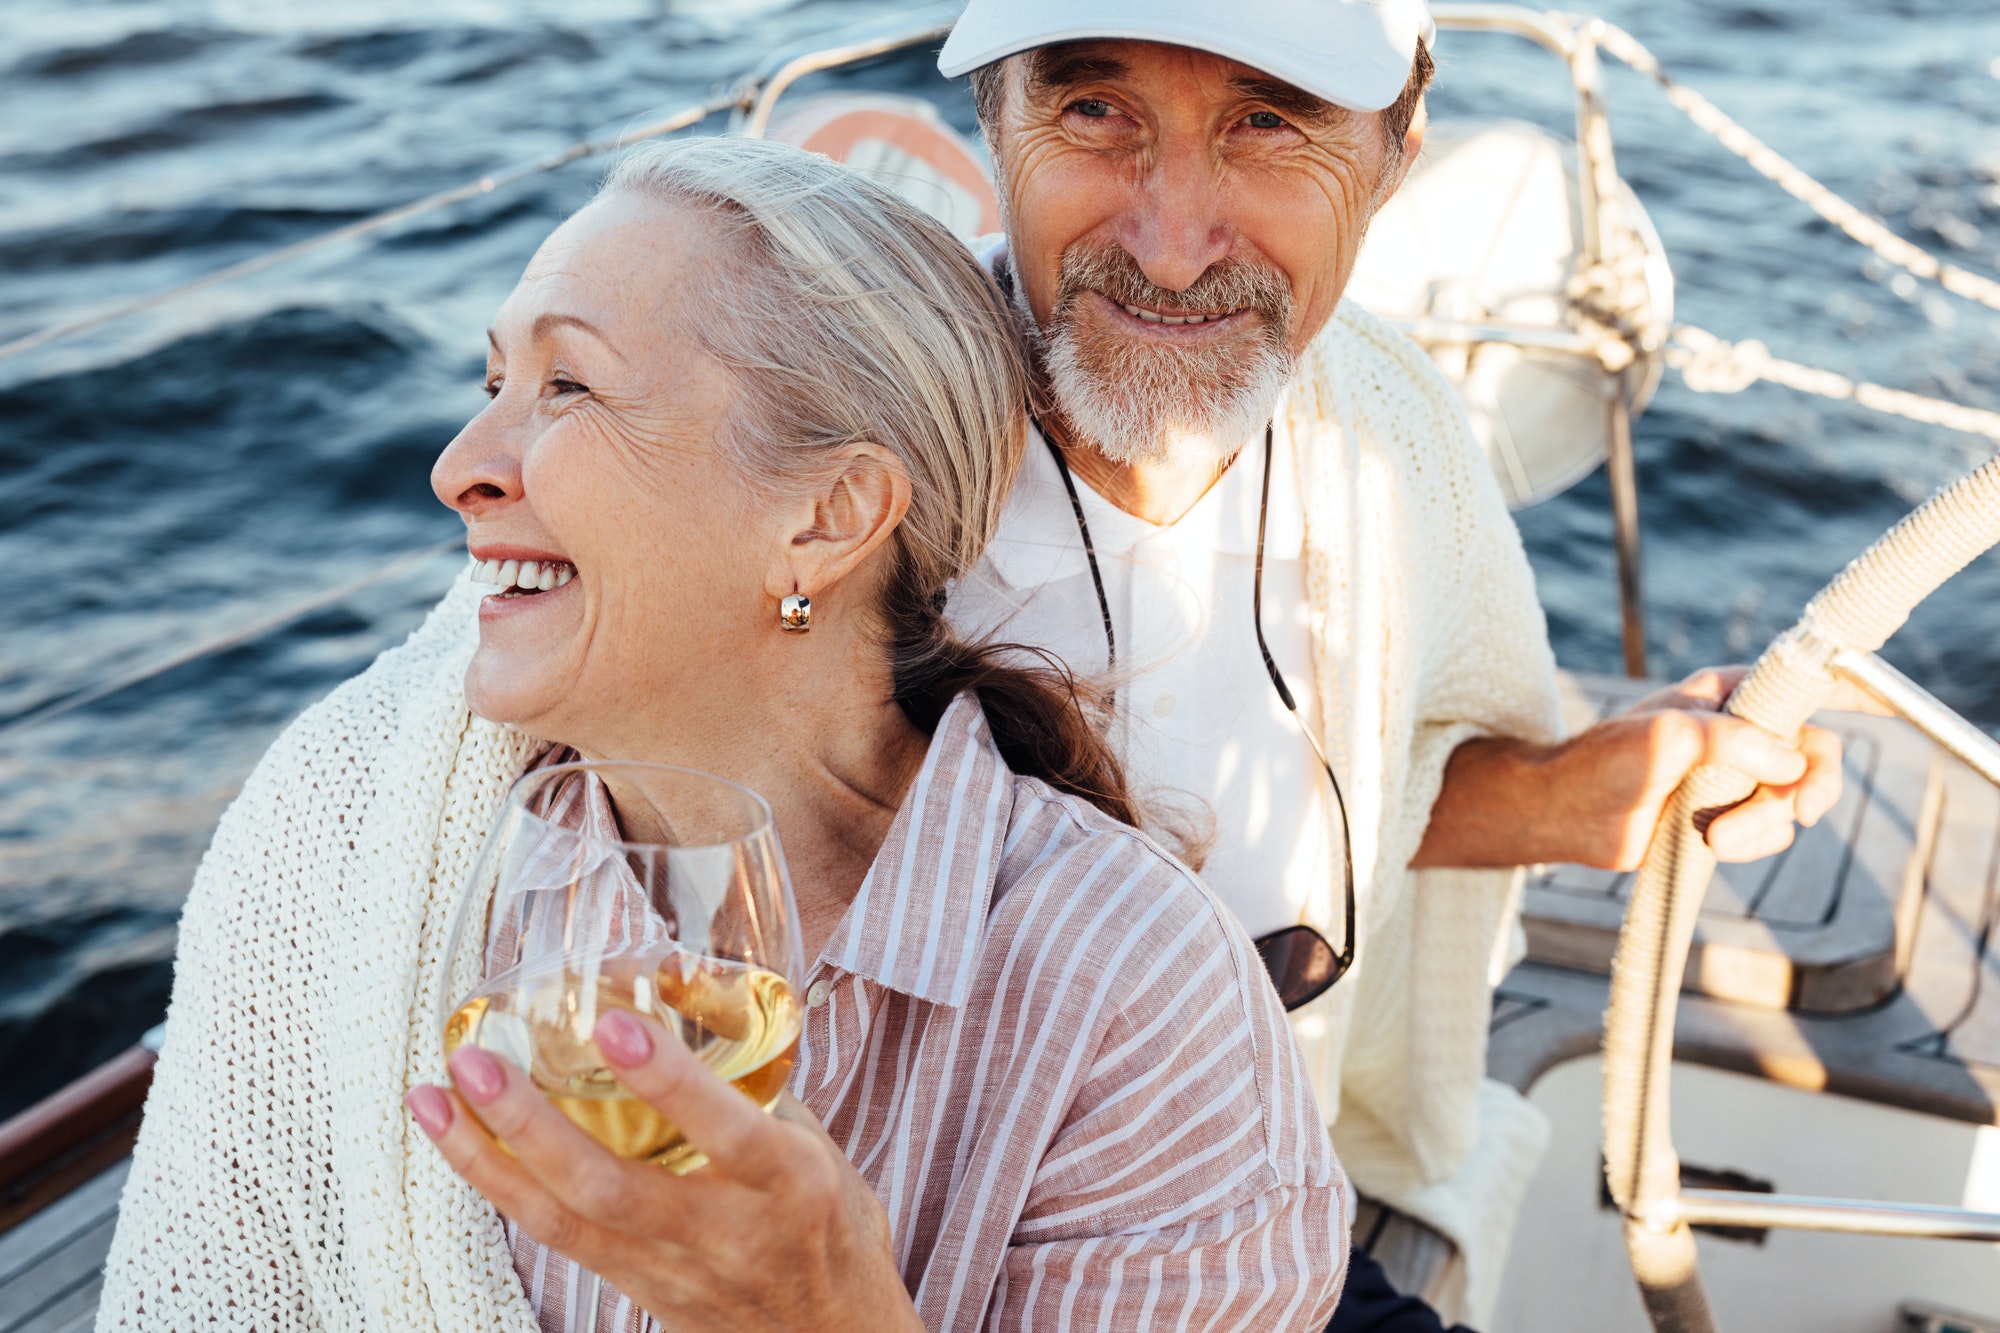 Smiling elderly couple enjoying vacation on a private yacht